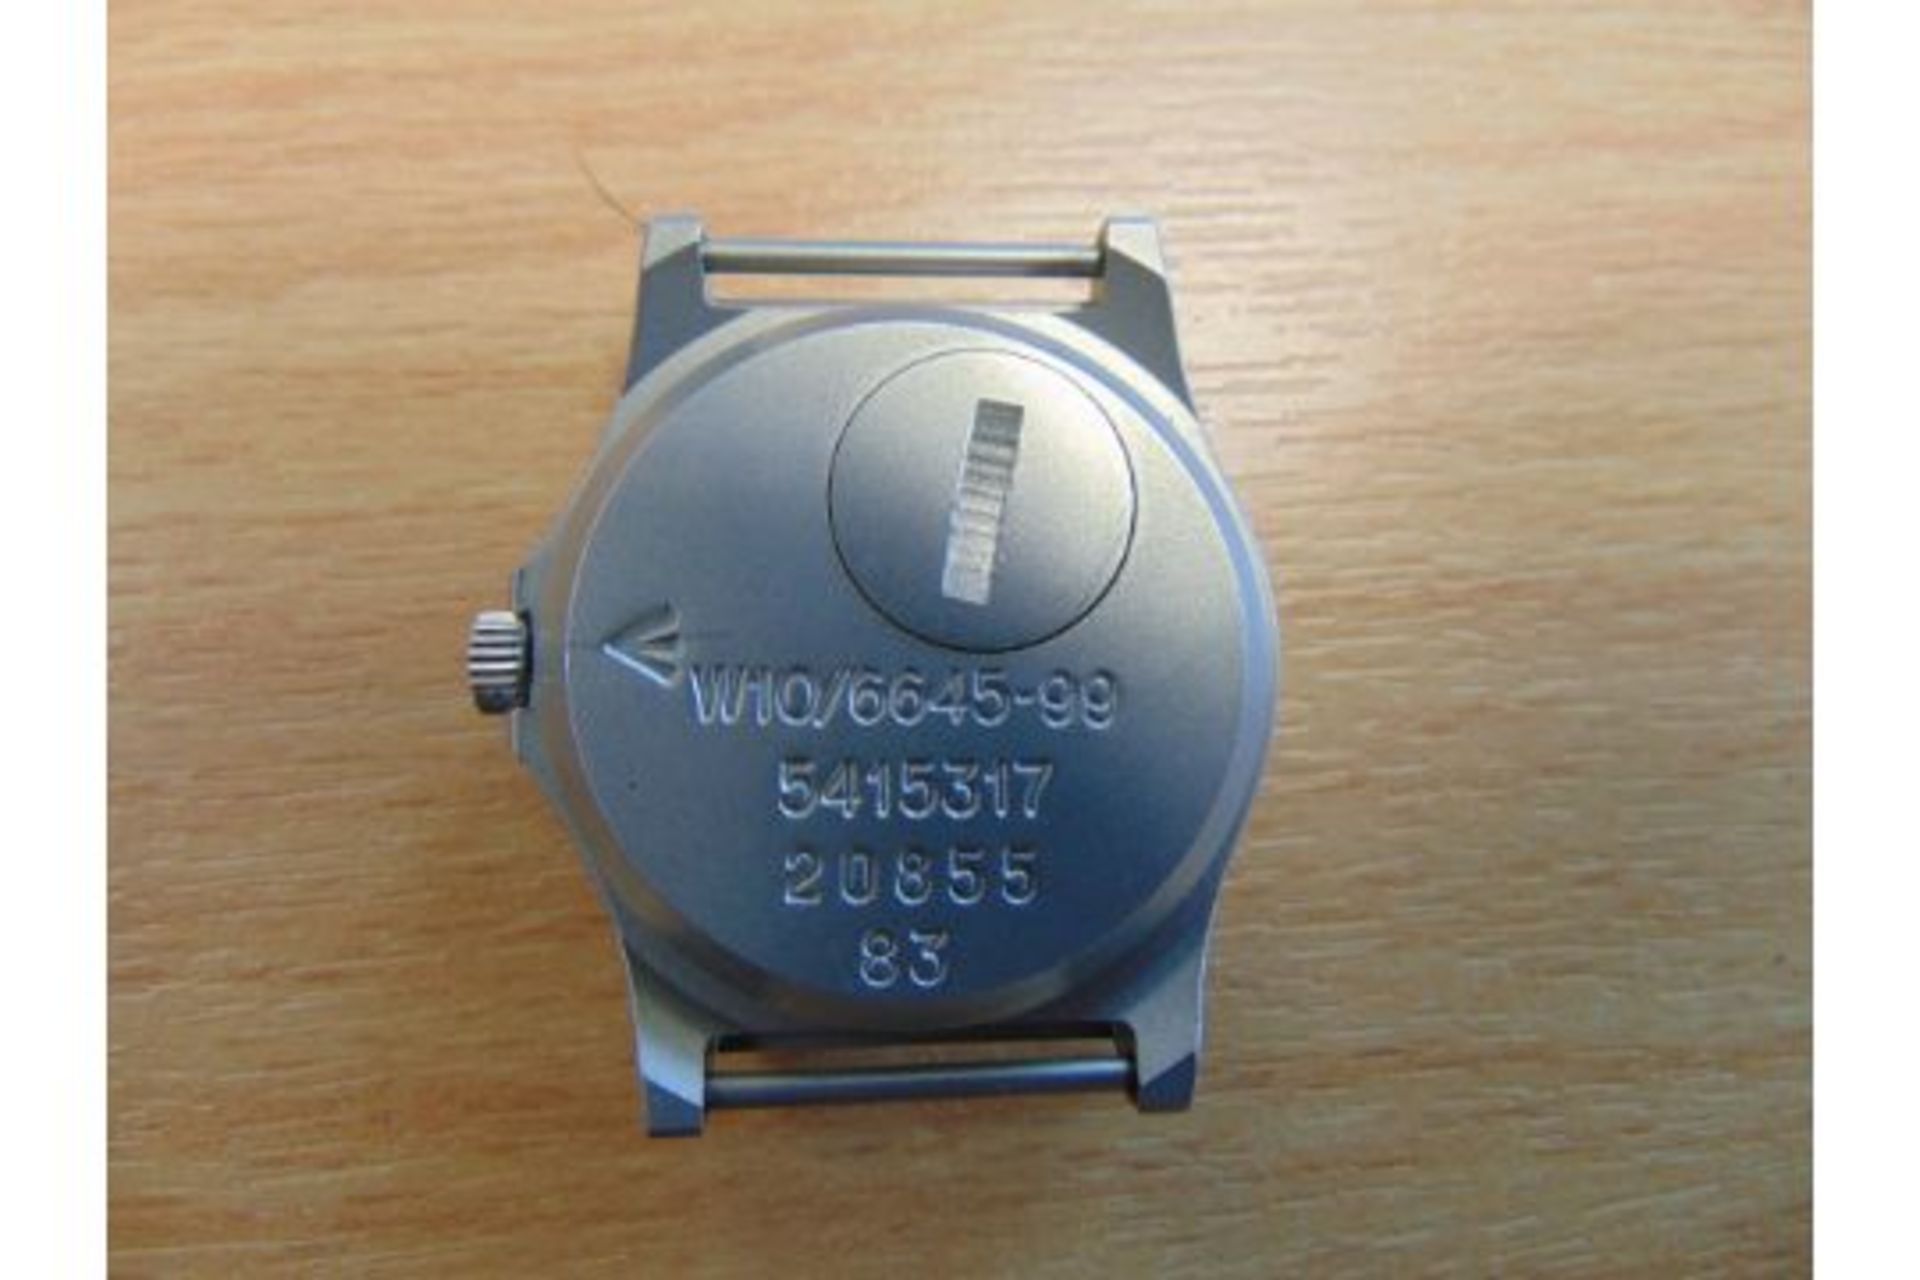 V Rare Unissued FAT BOY CWC (Cabot Watch Co Switzerland) British Army W10 Service Watch Dated 1983 - Image 2 of 5